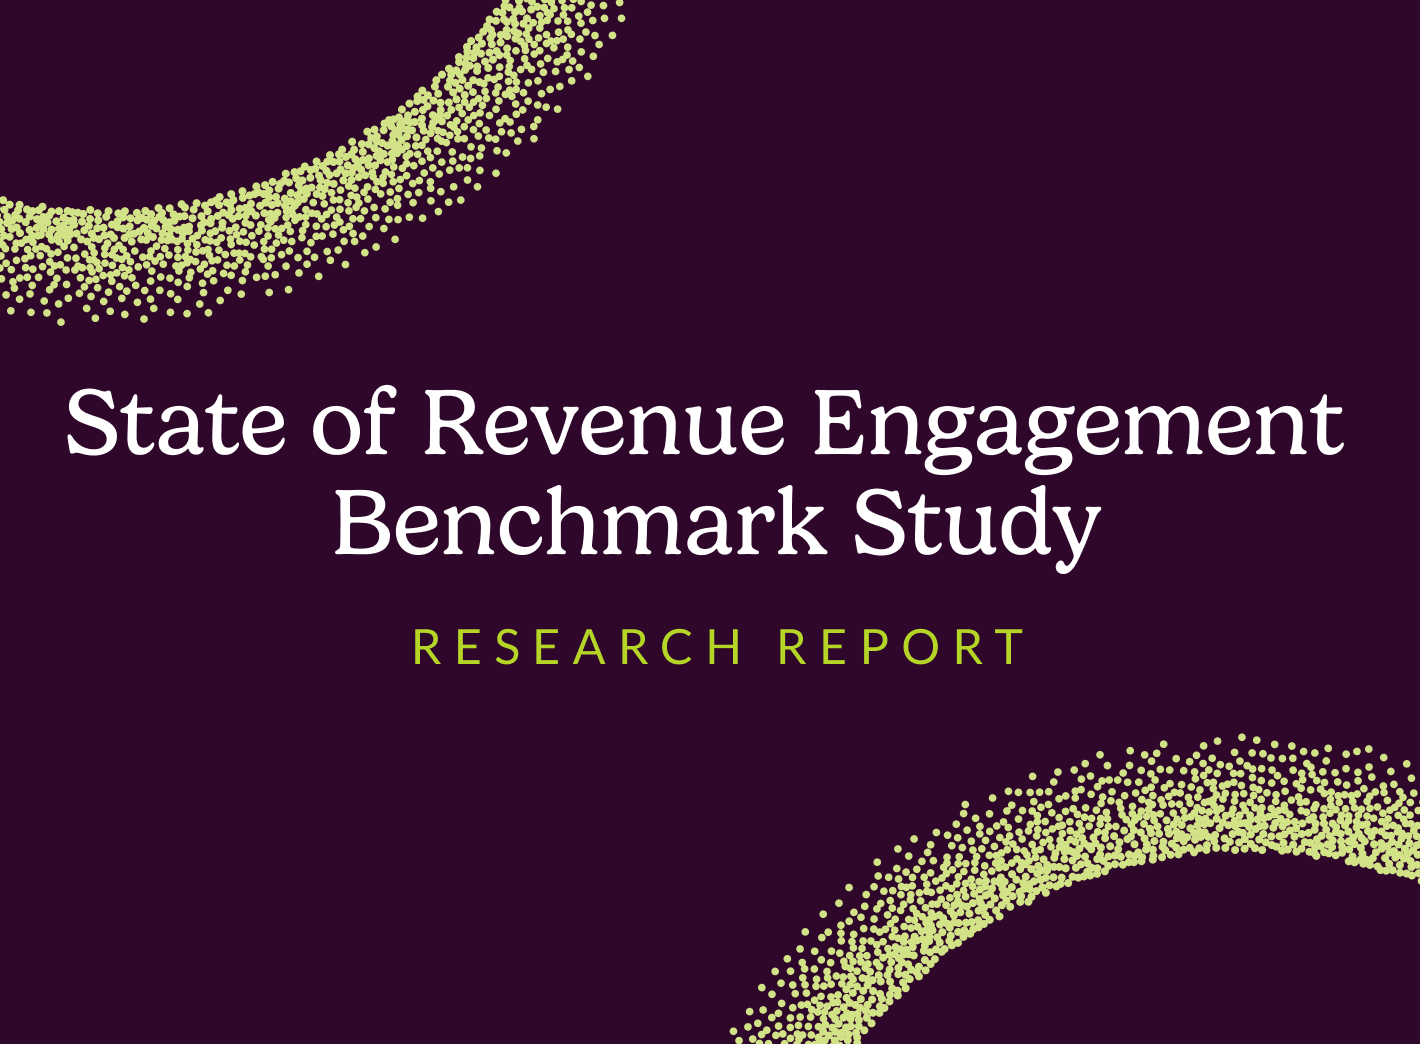 State of Revenue Engagement Benchmark Study